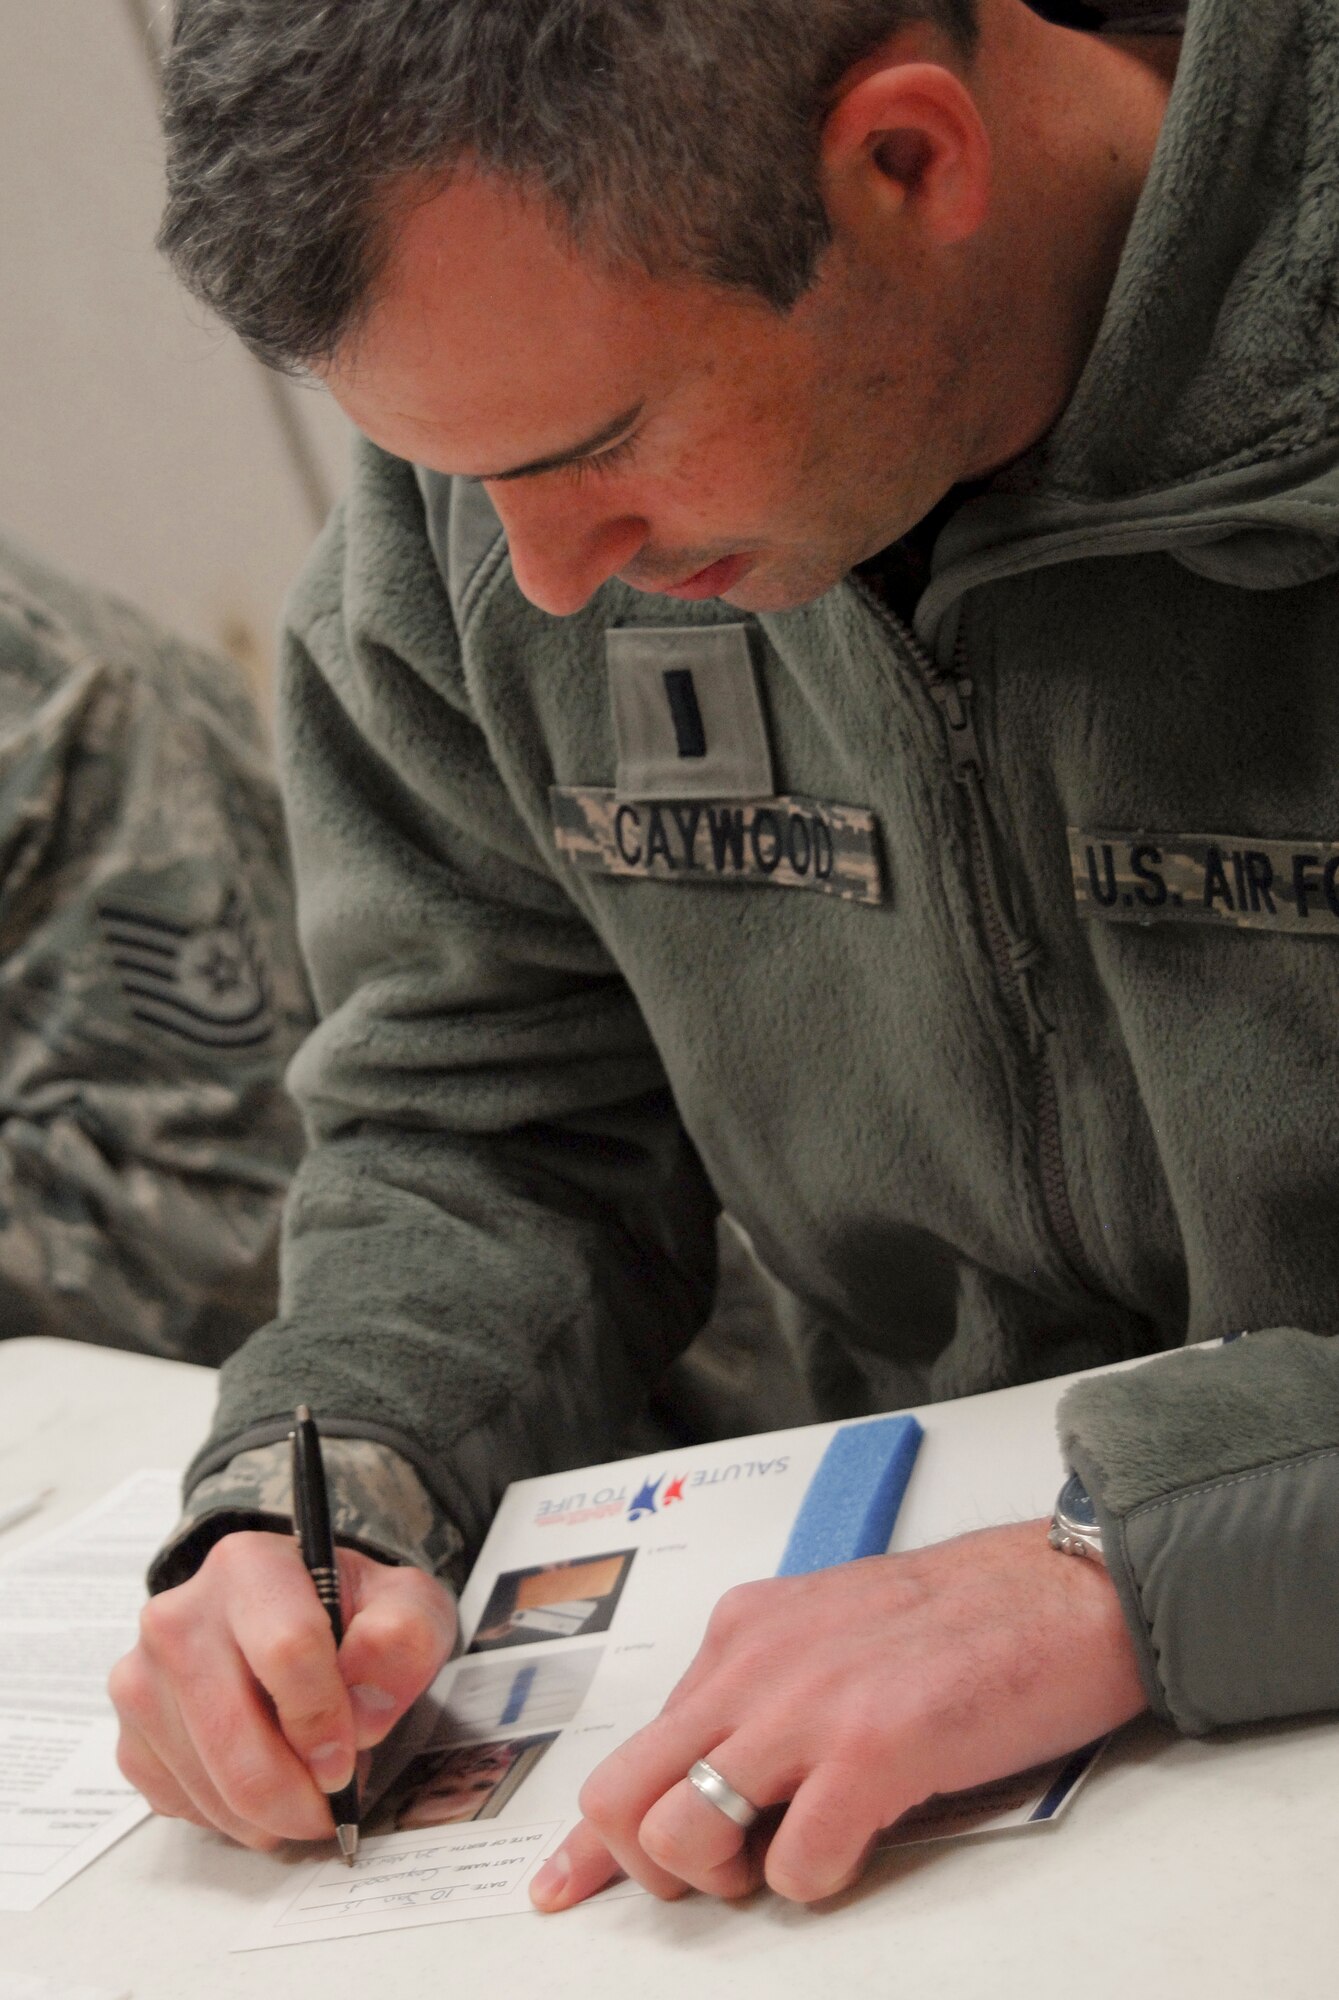 U.S. Air Force Chaplain, 1st Lt. Robert Caywood, a chaplain with the 180th Fighter Wing, filled out a consent form during the wing's two-day bone marrow registration drive Jan. 10 2015, part of the Salute to Life Program. The Salute to Life Program, also known as the C.W. Bill Young/Department of Defense Marrow Donor Program, works with active duty and their dependents, guard, reservist and Department of Defense civilian employees to facilitate marrow and stem cell donations. All of the donors are volunteers and since the program inception in 1991, more than 750,000 individuals to fight against blood cancer and other fatal diseases.  Air National Guard photo by Senior Master Sgt. Beth Holliker (Released)